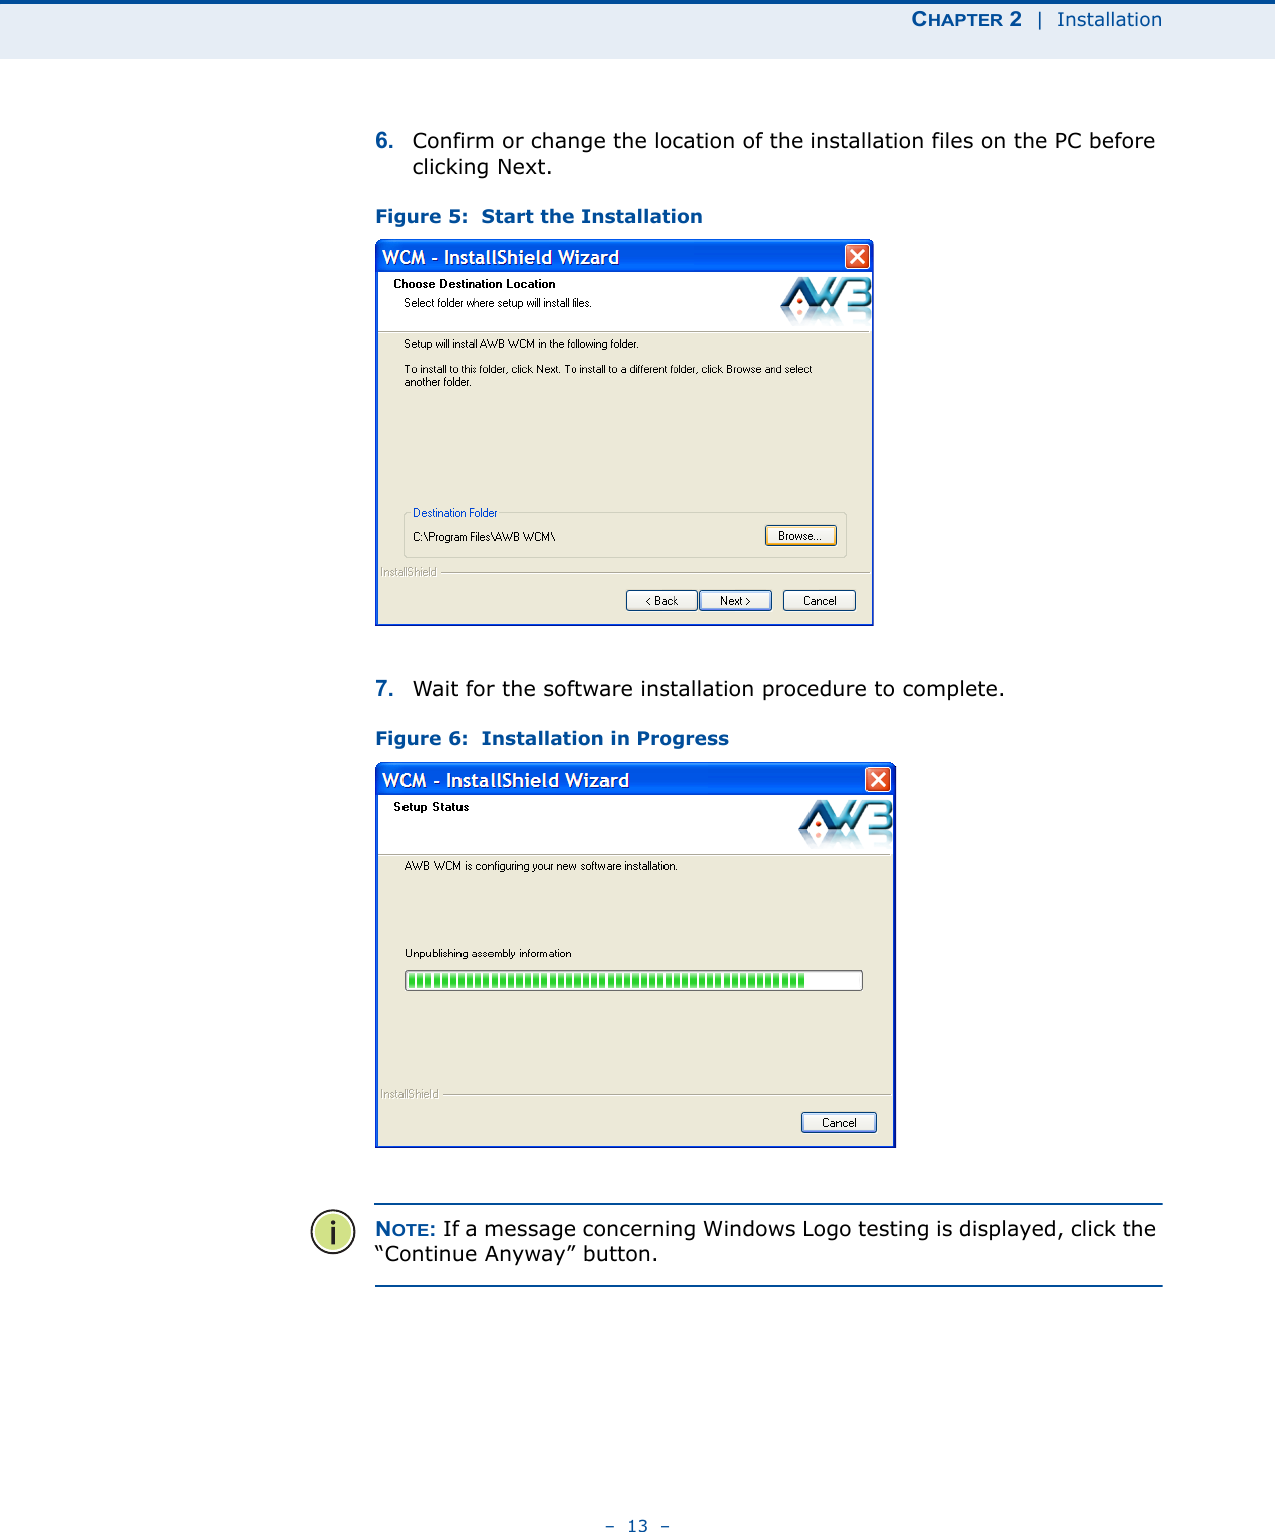 CHAPTER 2  |  Installation–  13  –6. Confirm or change the location of the installation files on the PC before clicking Next.Figure 5:  Start the Installation7. Wait for the software installation procedure to complete.Figure 6:  Installation in ProgressNOTE: If a message concerning Windows Logo testing is displayed, click the “Continue Anyway” button.